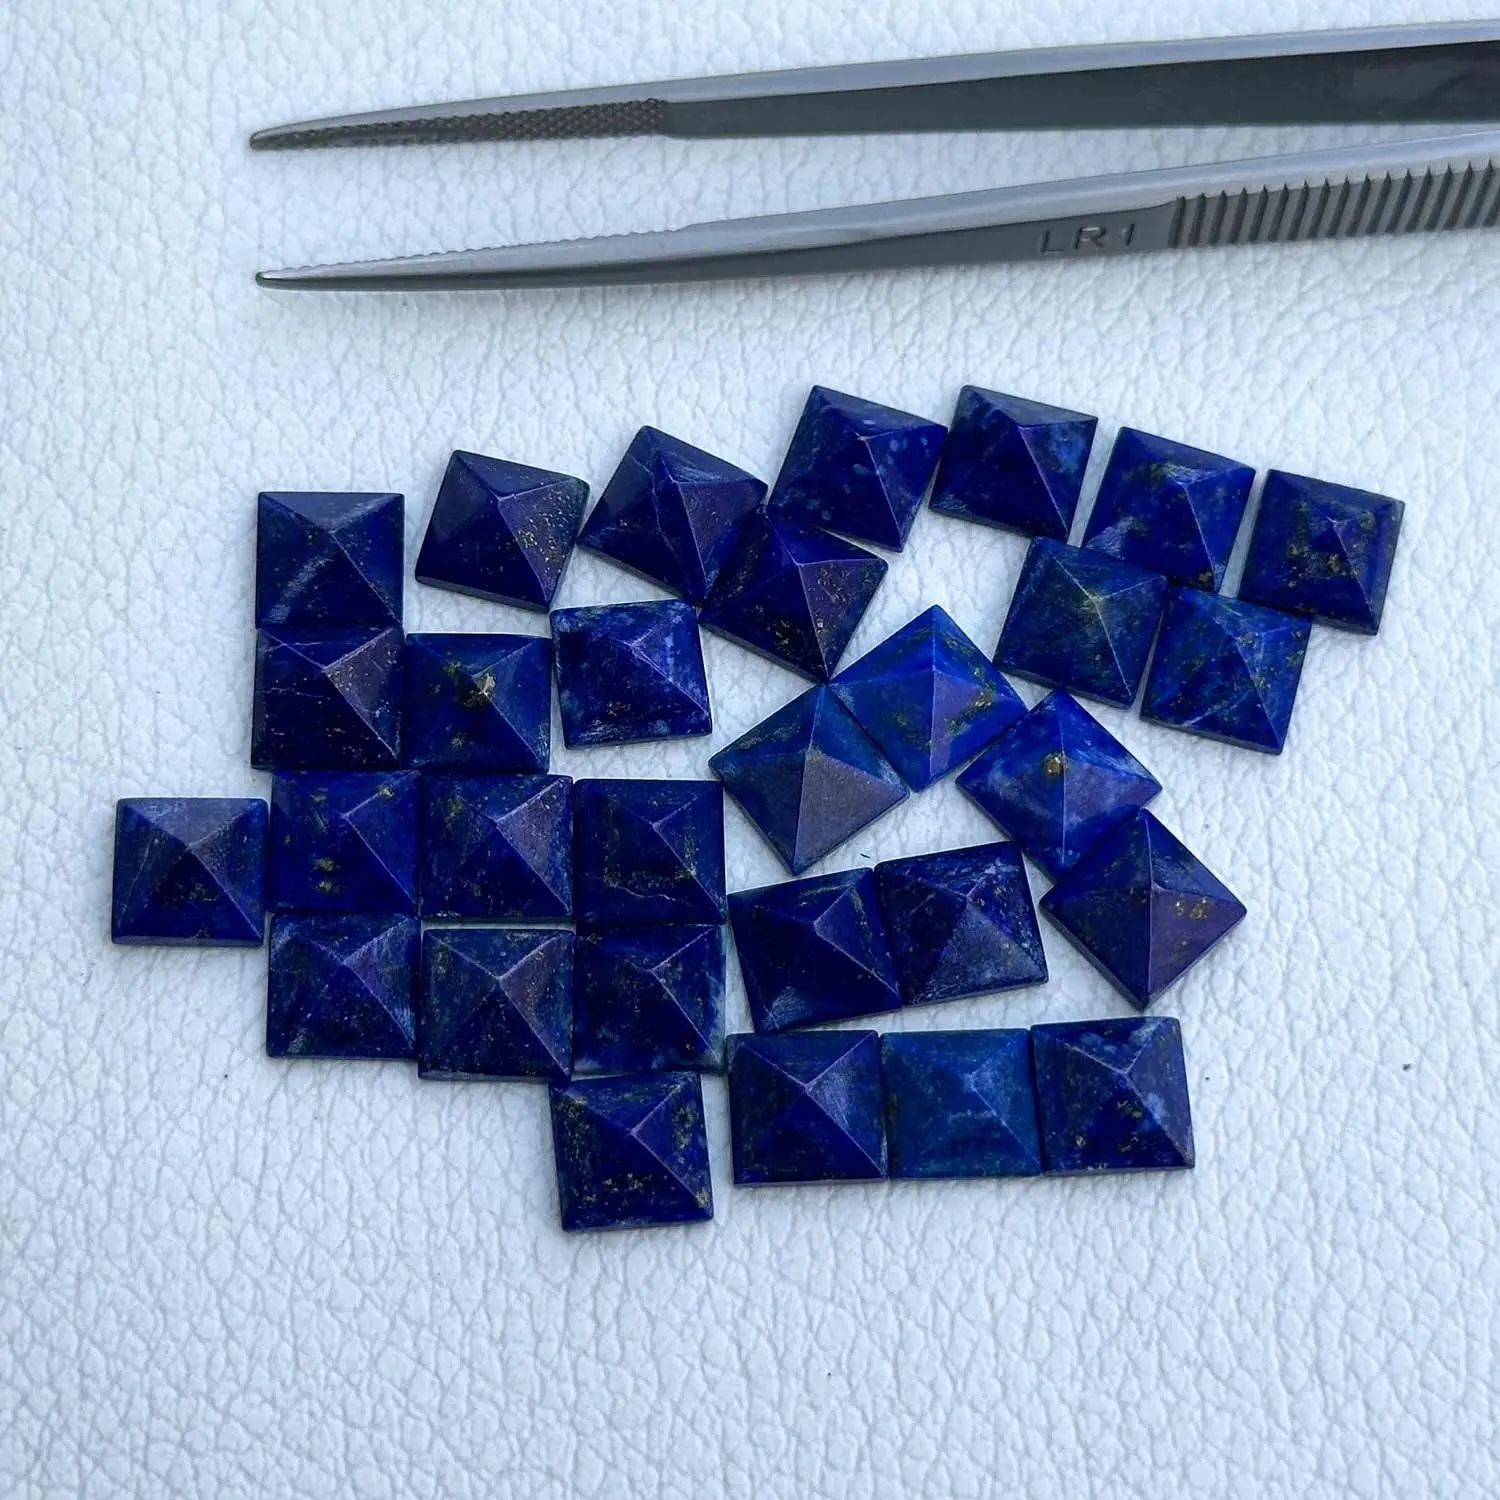 Extremely Fine Quality Natural Blue Lapis Lazuli Pyramid 10mm Customized Gemstones For Necklace Bracelets Ring Jewelry Making